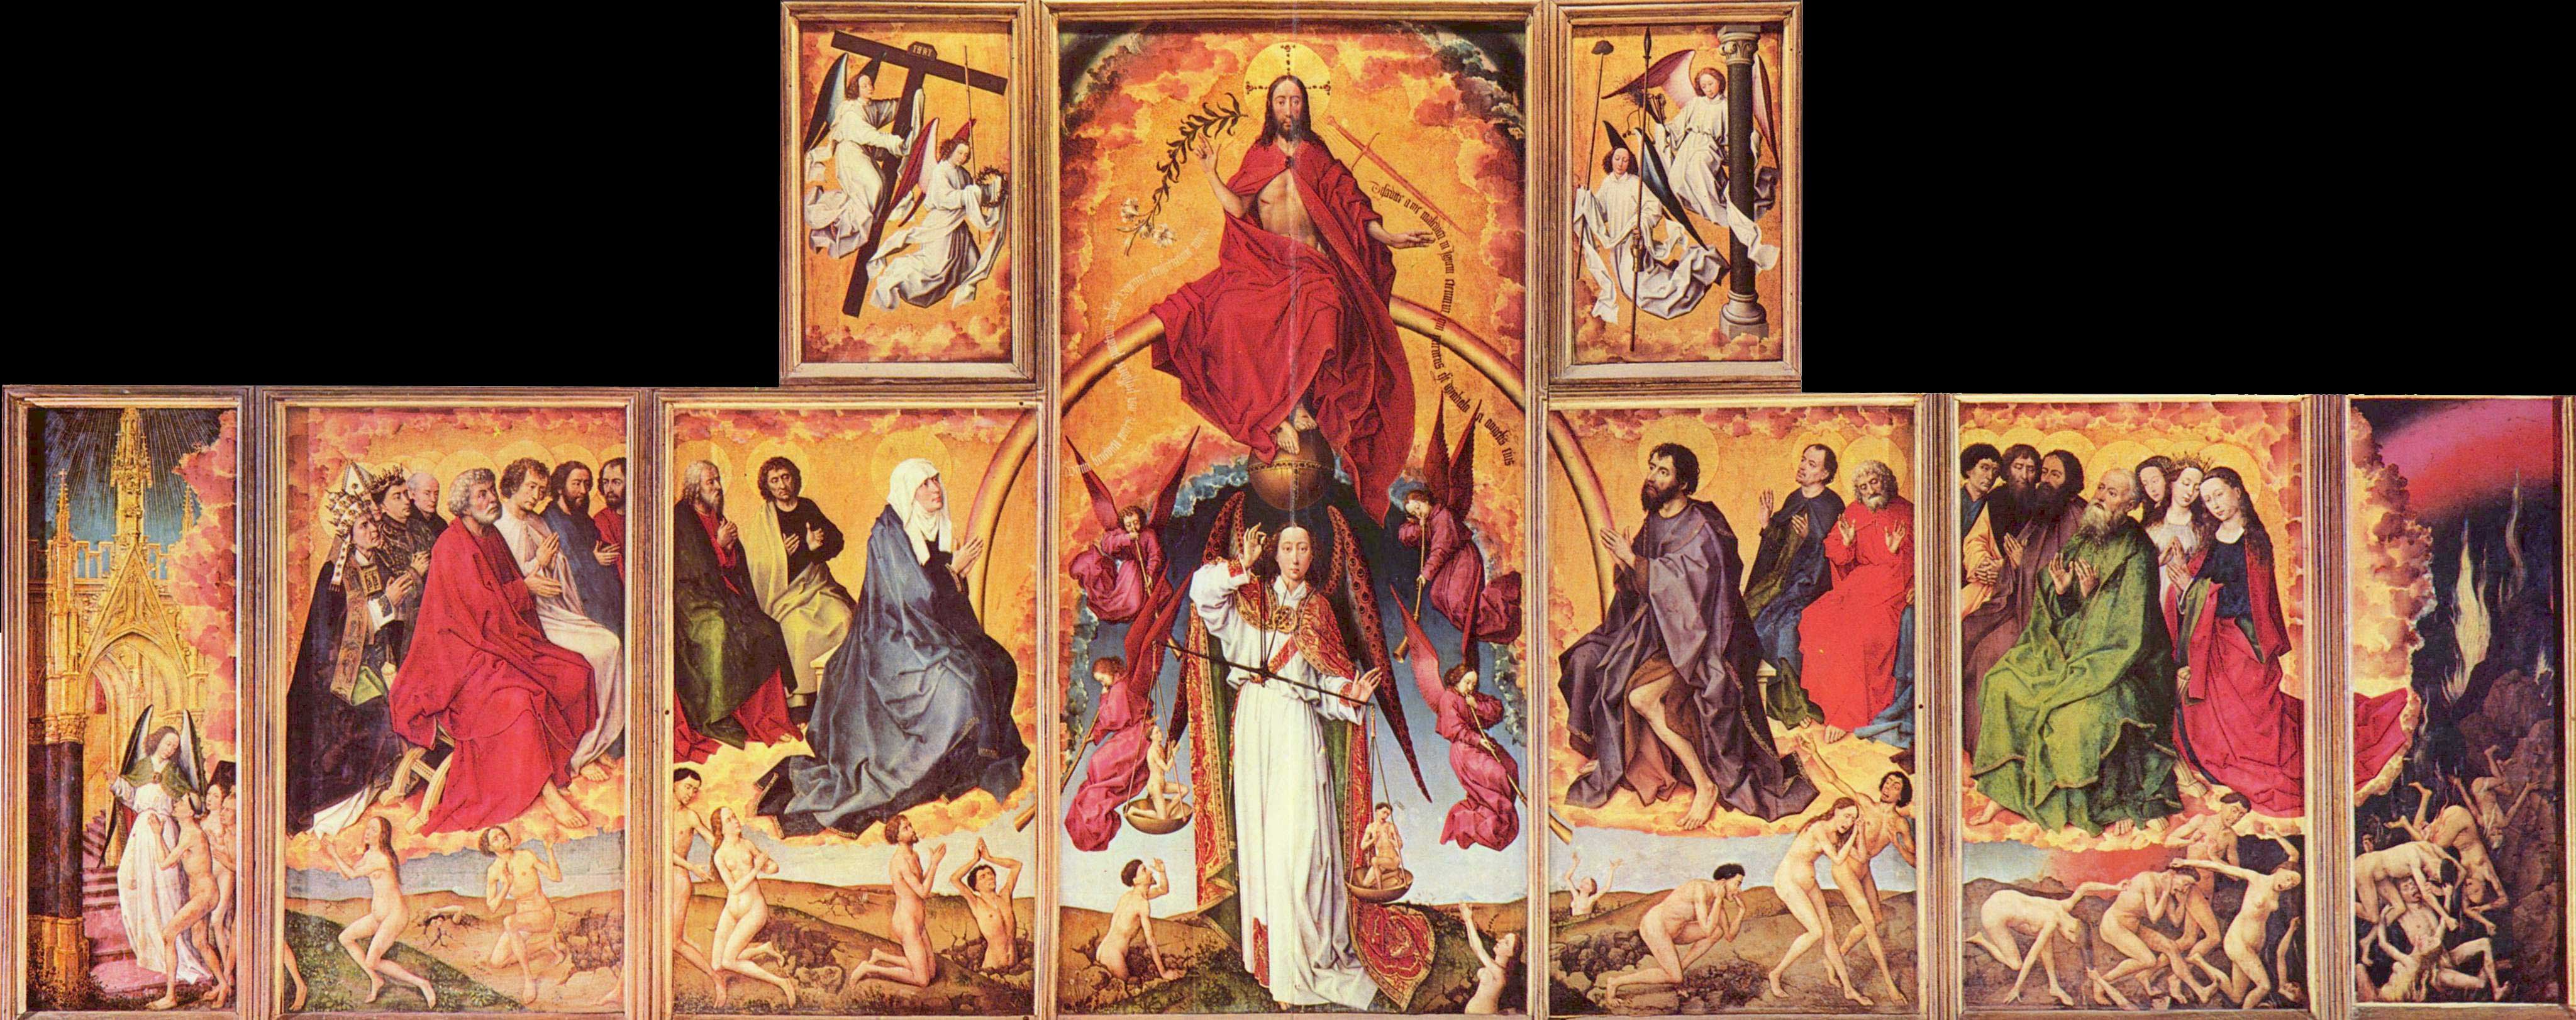 The Last Judgment, subject of the prescribed readings of Trinitatis XXV, as depicted so magnificently around 1445-1450 by Rogier Van der Weyden (1399 or 1400-1464). Commissioned by Nicolas Rolin, chancellor of the Duke of Burgundy, for the Hospices de Beaune (which he founded), and where it still hangs today.